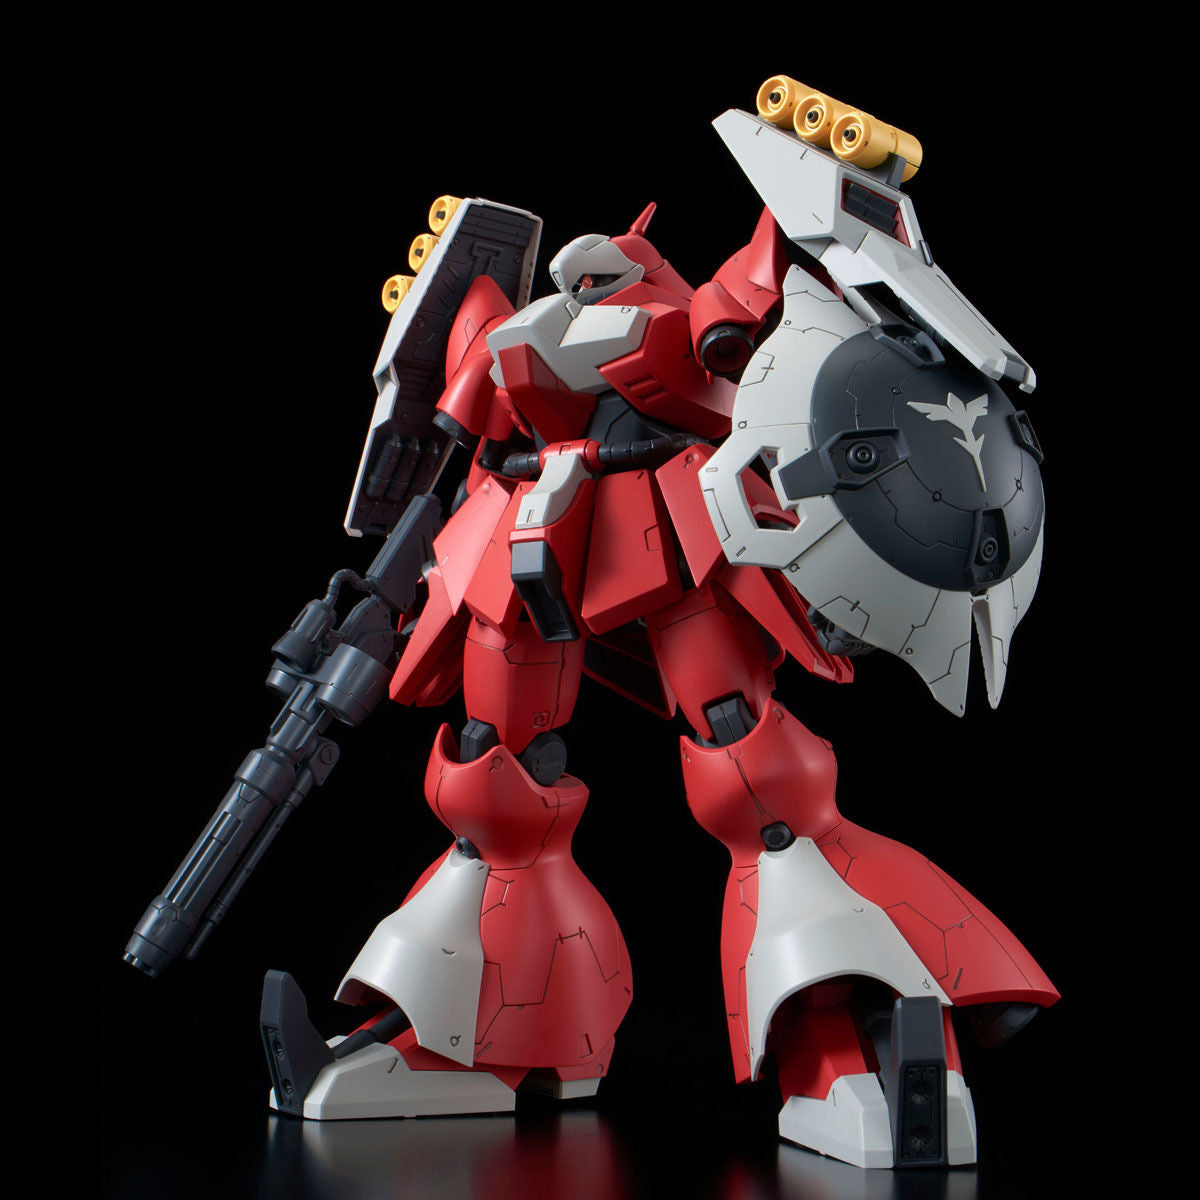 Gundam RE/100 Char's Counterattack Quess Air's Jagd Doga Model Kit Exclusive